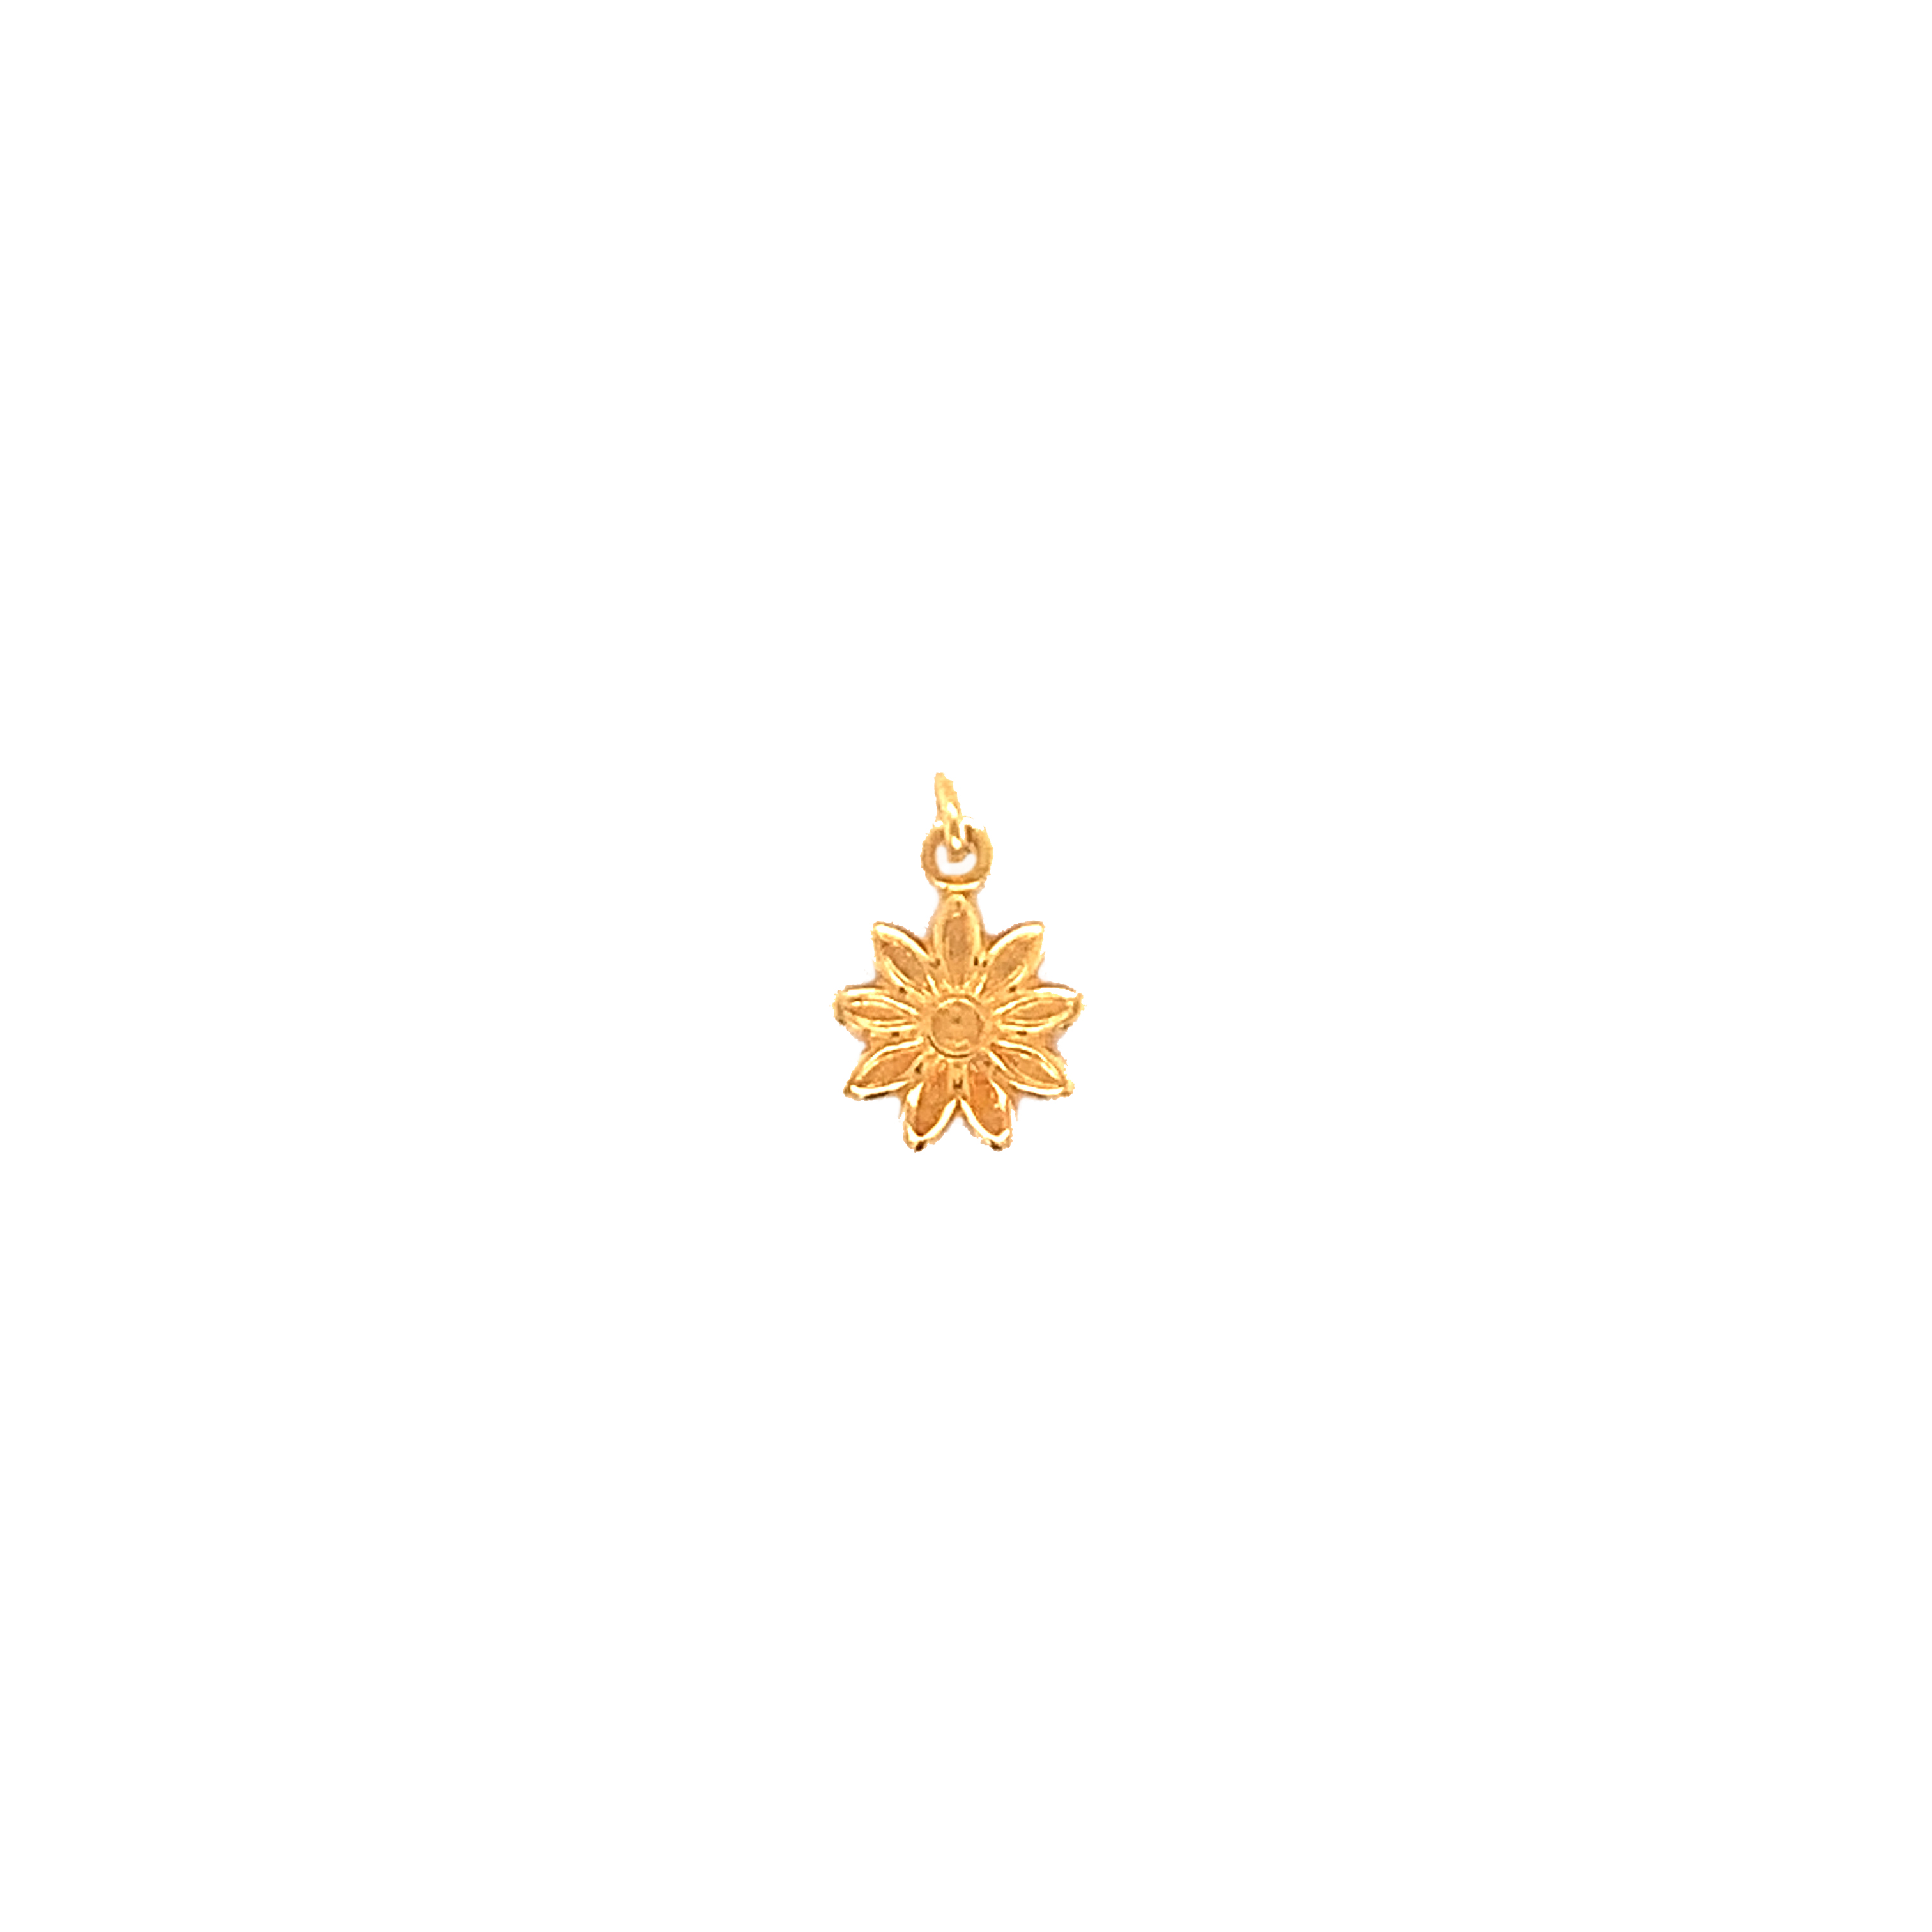 Daisy Charm - Gold Filled